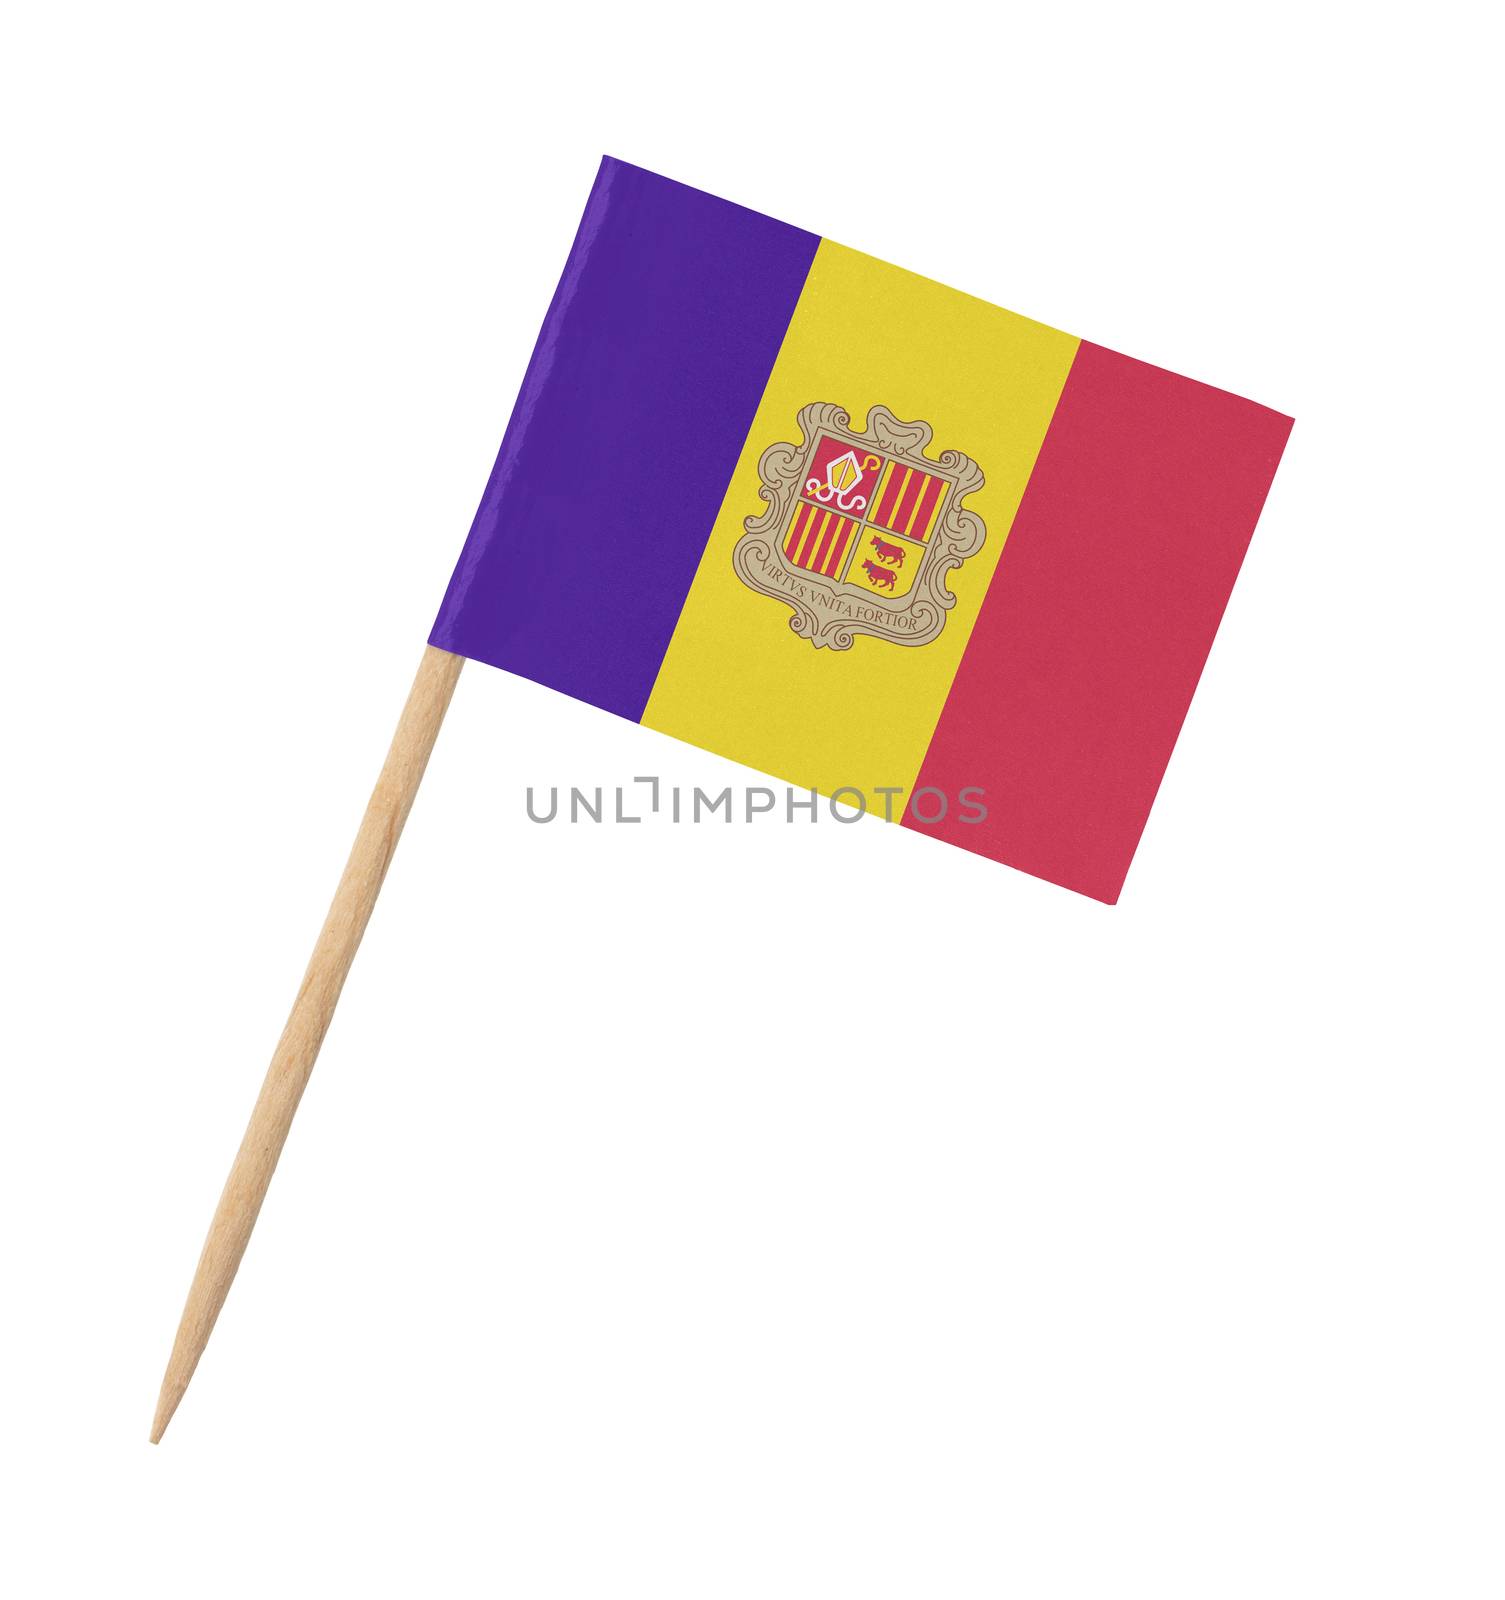 Small paper flag of Andorra on wooden stick by michaklootwijk